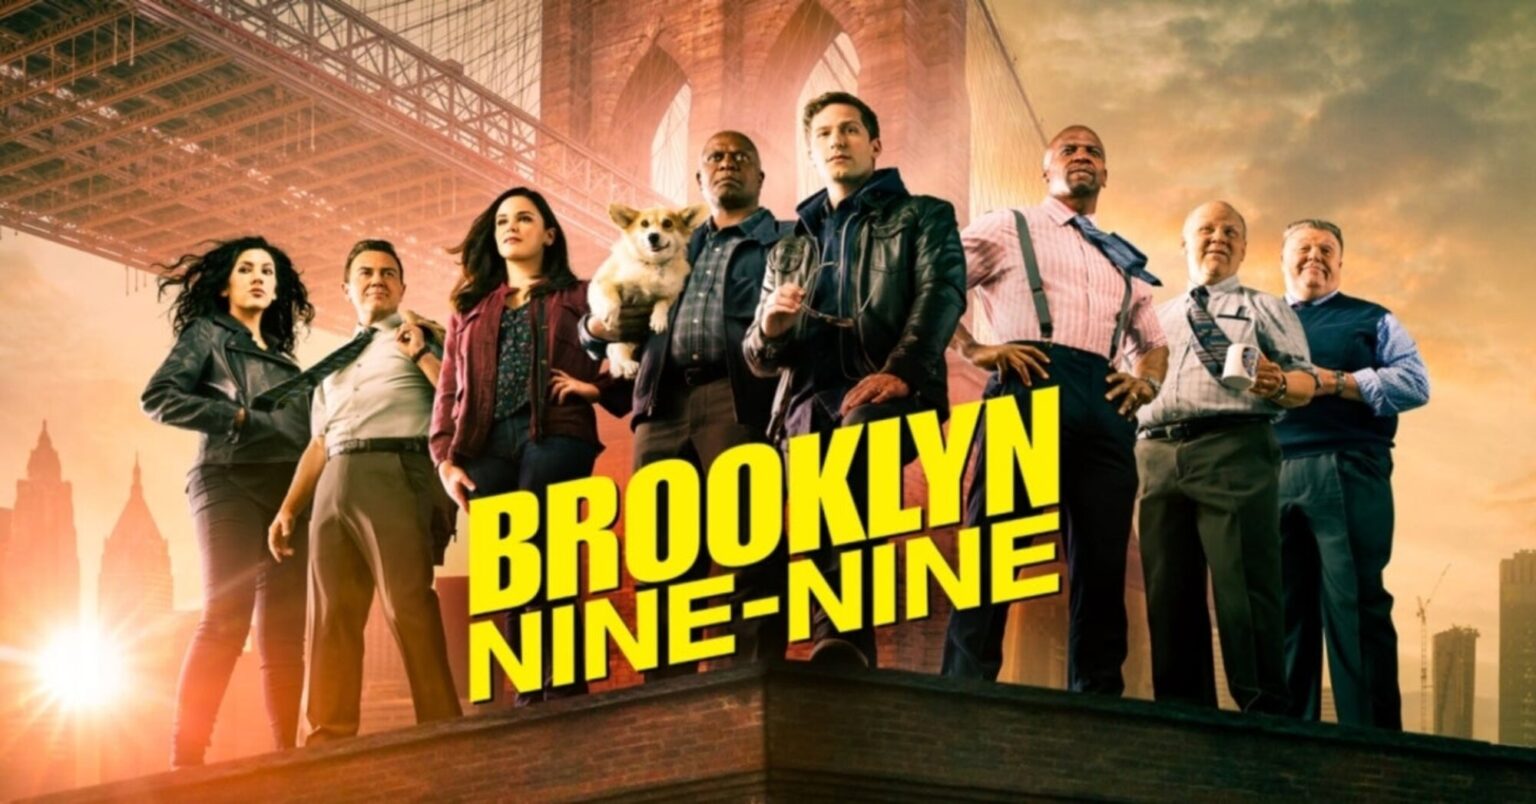 NBC Universal dropped the trailer for the upcoming final season of 'Brooklyn Nine-Nine'. Join us as we bid farewell to this iconic comedic series.